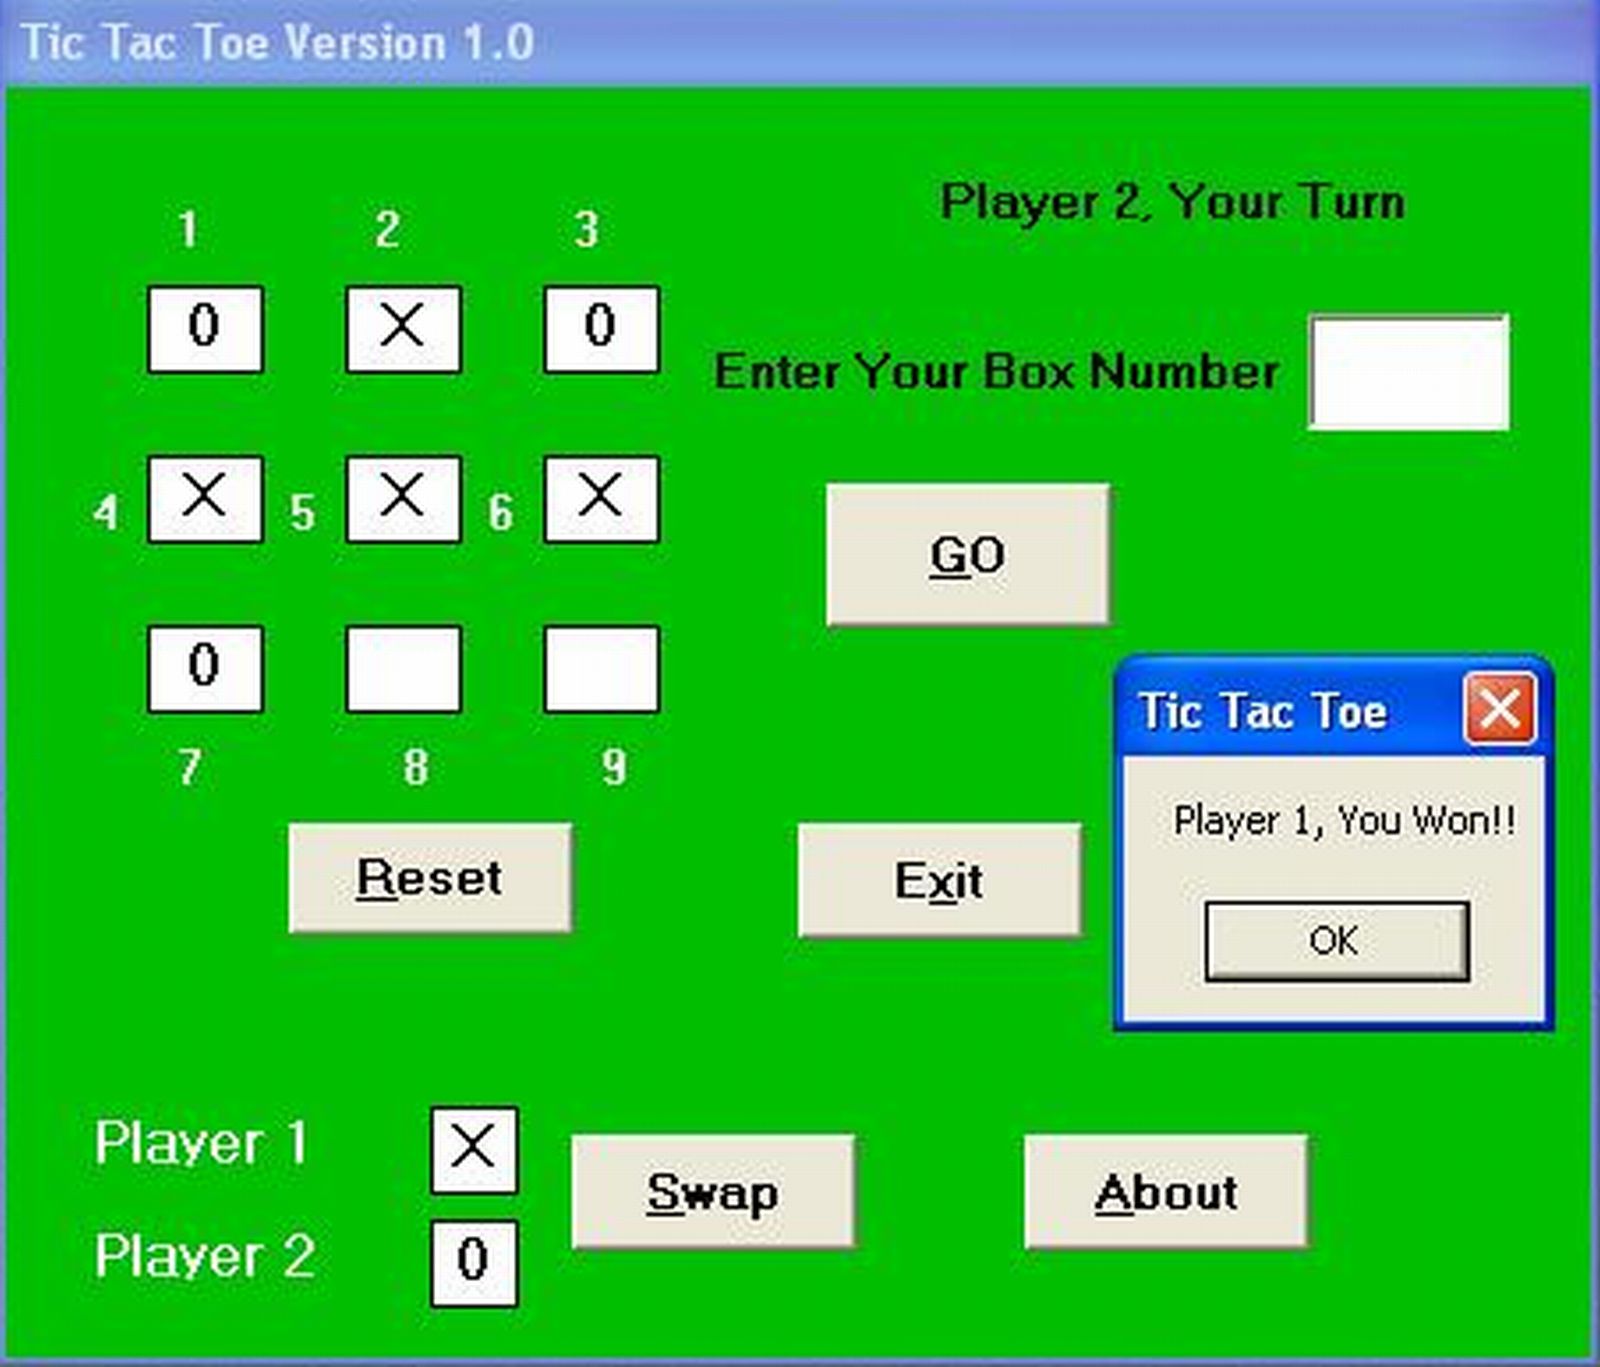 Simple Tic Tac Toe Version 27.27  Free Source Code, Projects